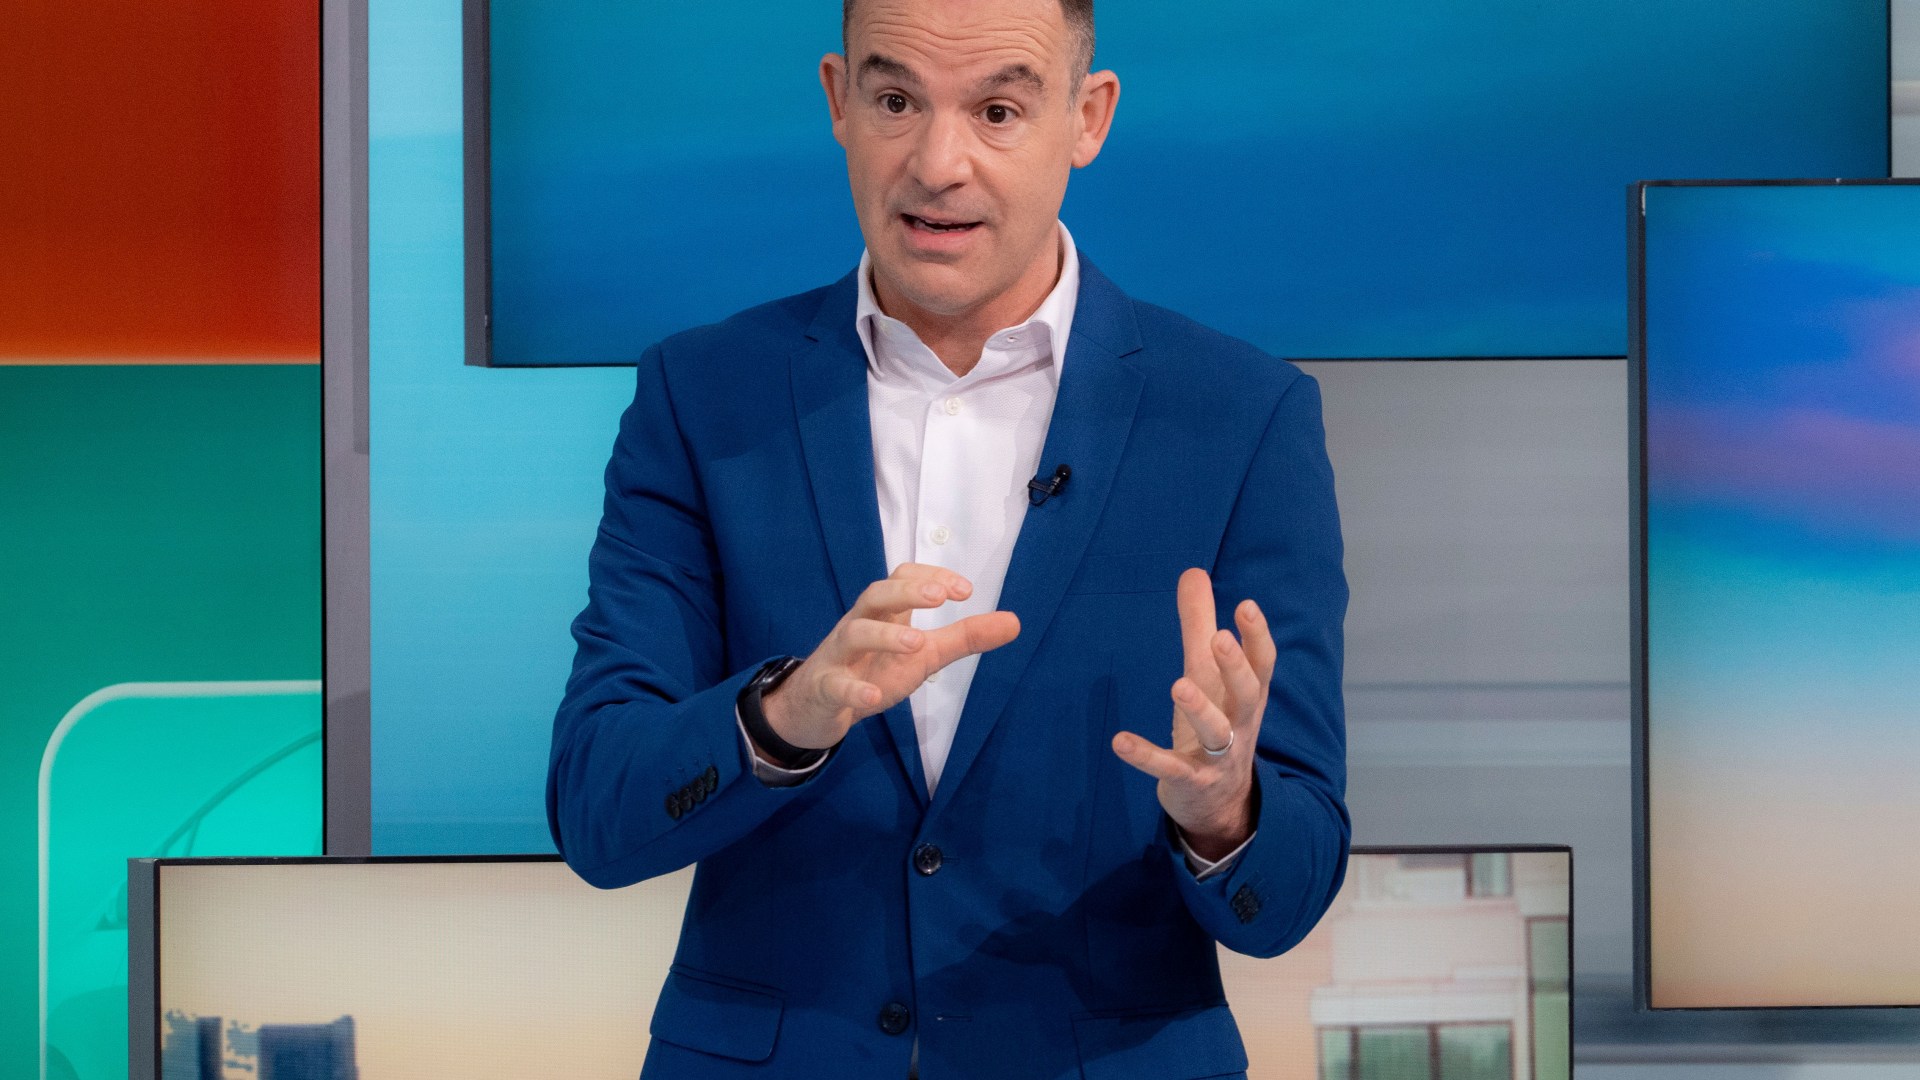 Martin Lewis’ MSE reveals little-known shop with up to 80% off Next, Zara and Nike – prices start from just 3.60 [Video]